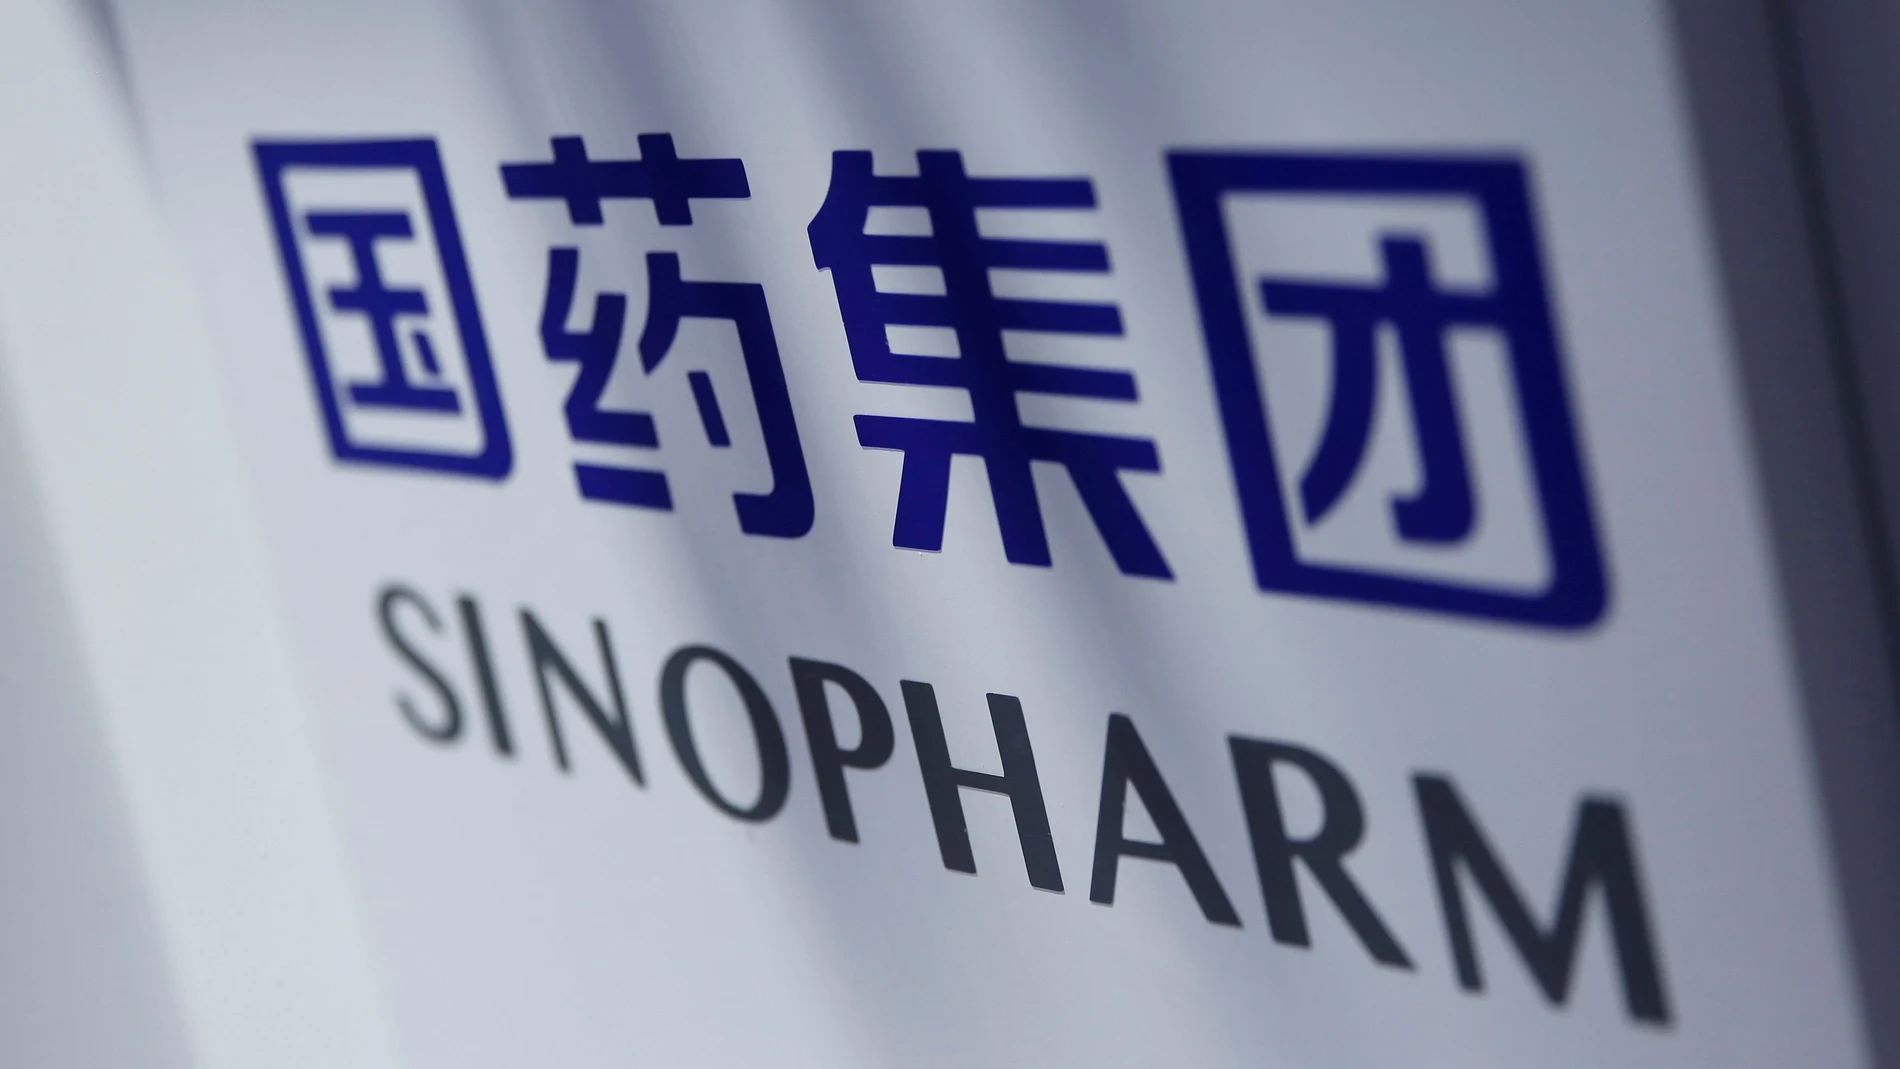 FILE PHOTO: A sign of Sinopharm is seen at the 2020 China International Fair for Trade in Services (CIFTIS), following the COVID-19 outbreak, in Beijing, China September 5, 2020. REUTERS/Tingshu Wang/File Photo